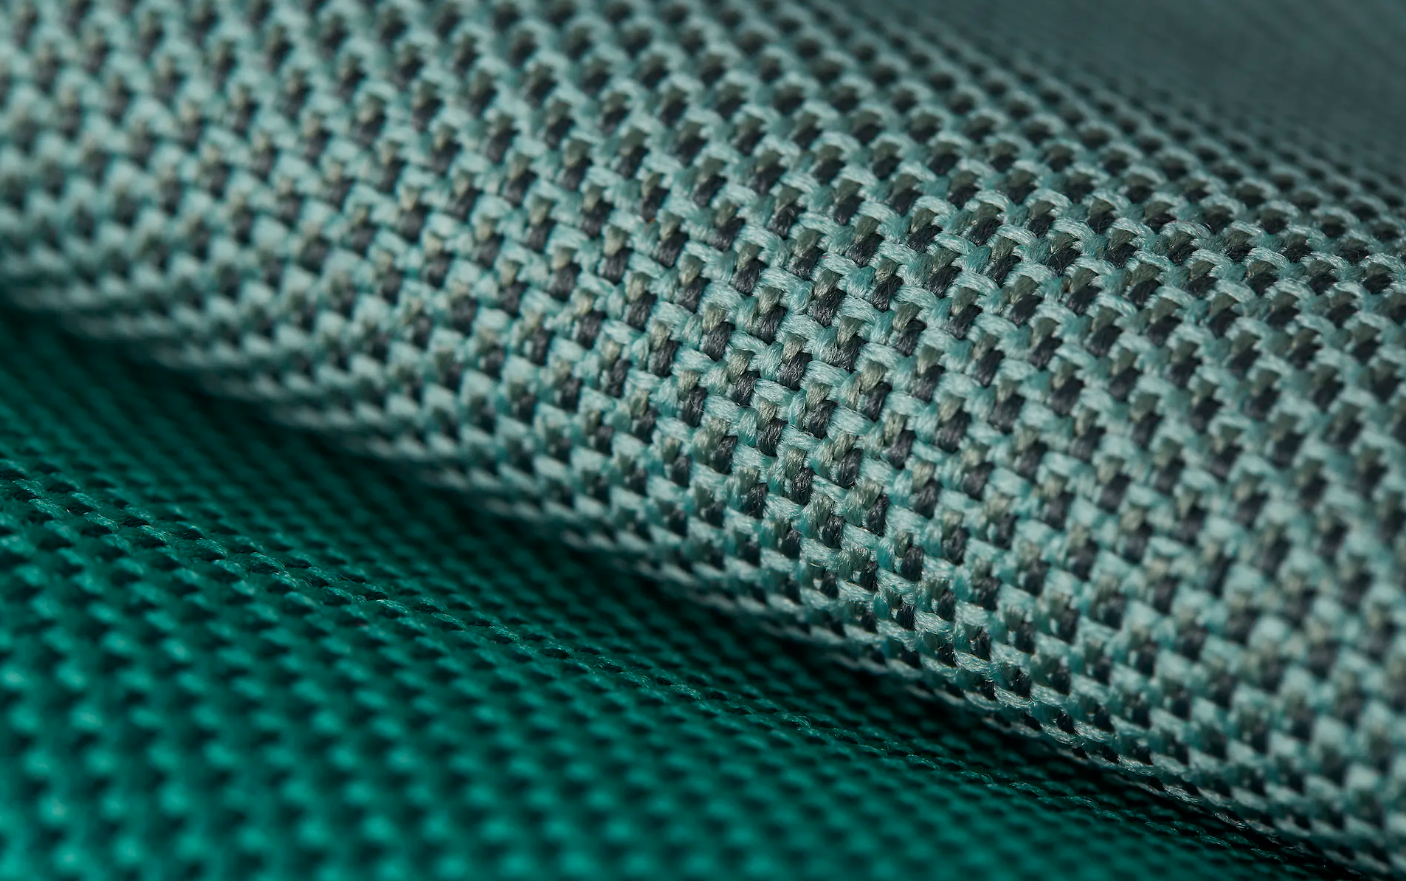 Material, Re-Invented: RePlay by Camira Fabrics